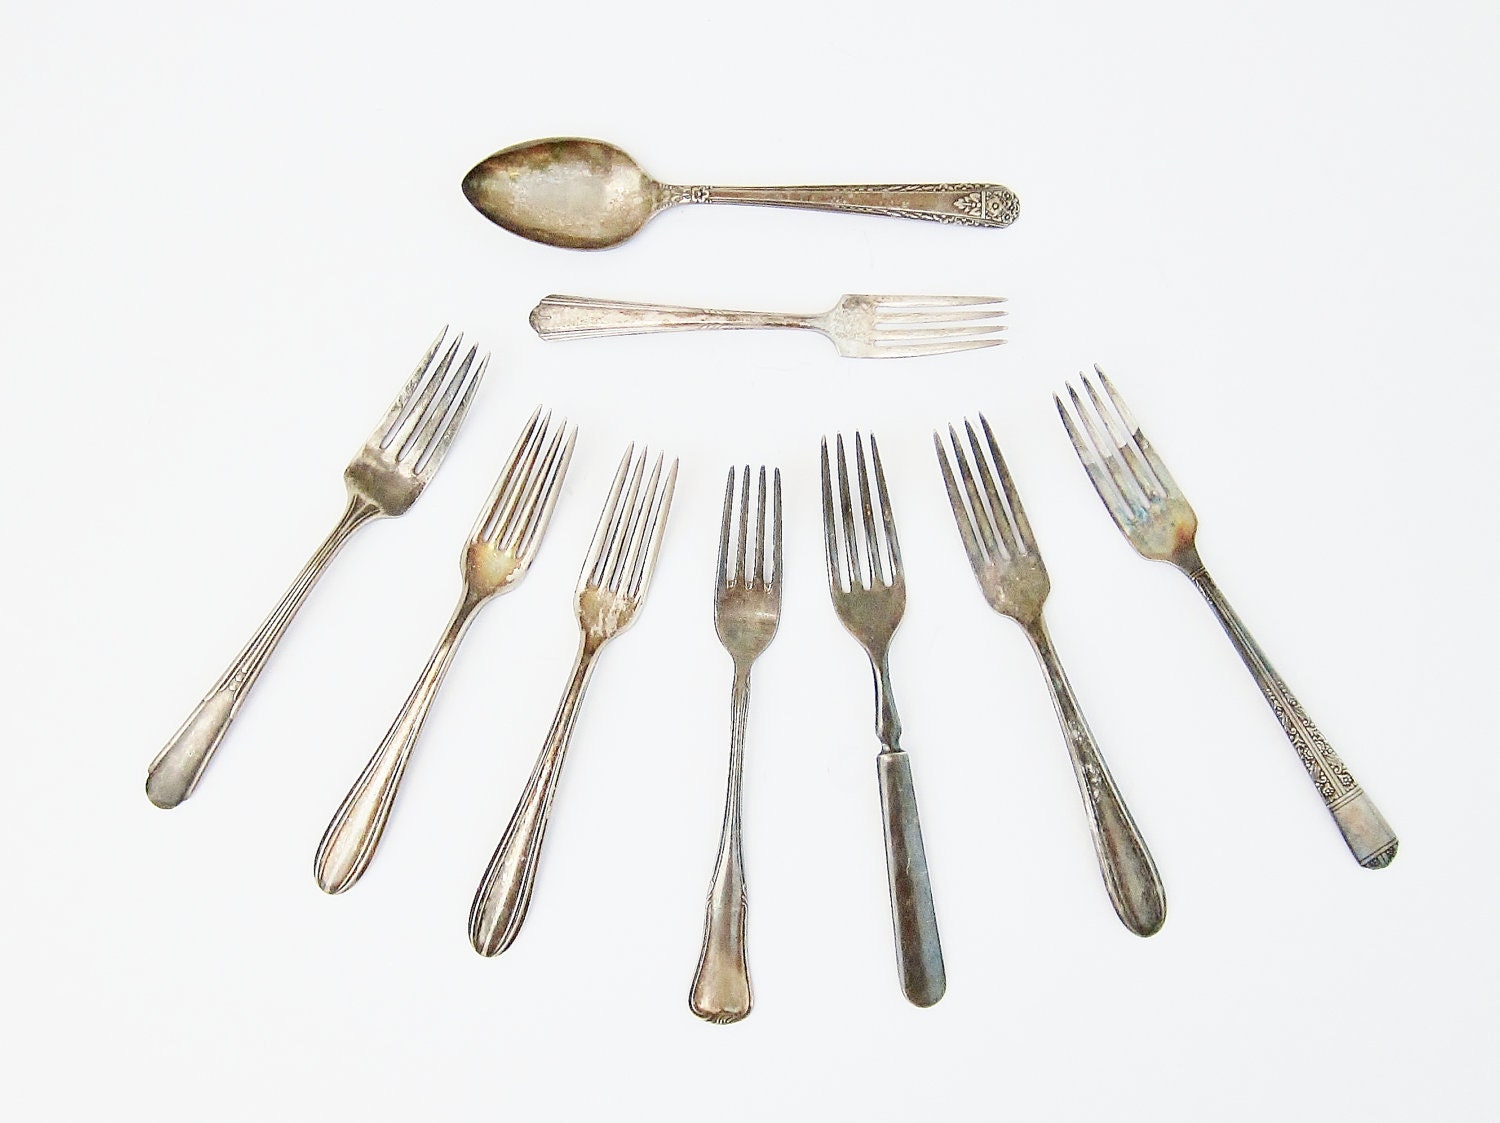 Silverware Oxidized Vintage Patina Rustic Silverplate Mixed Lot